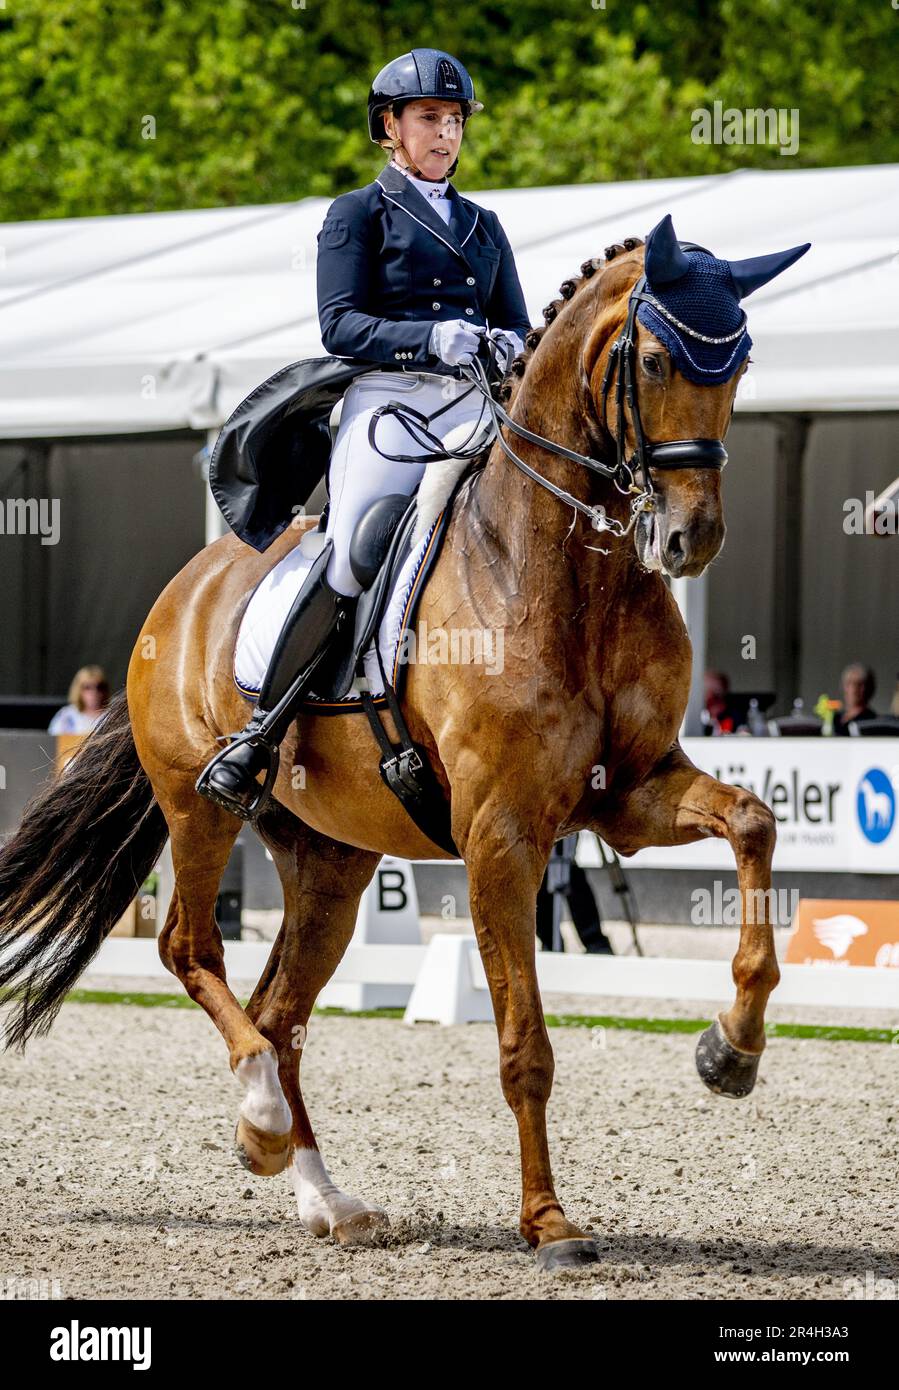 ERMELO - Mirelle van Kemenade-Witlox with Siebenstein 12 in action during the final of the Heavy Tour Freestyle at the NK Dressage. ANP ROBIN UTRECHT netherlands out - belgium out Stock Photo